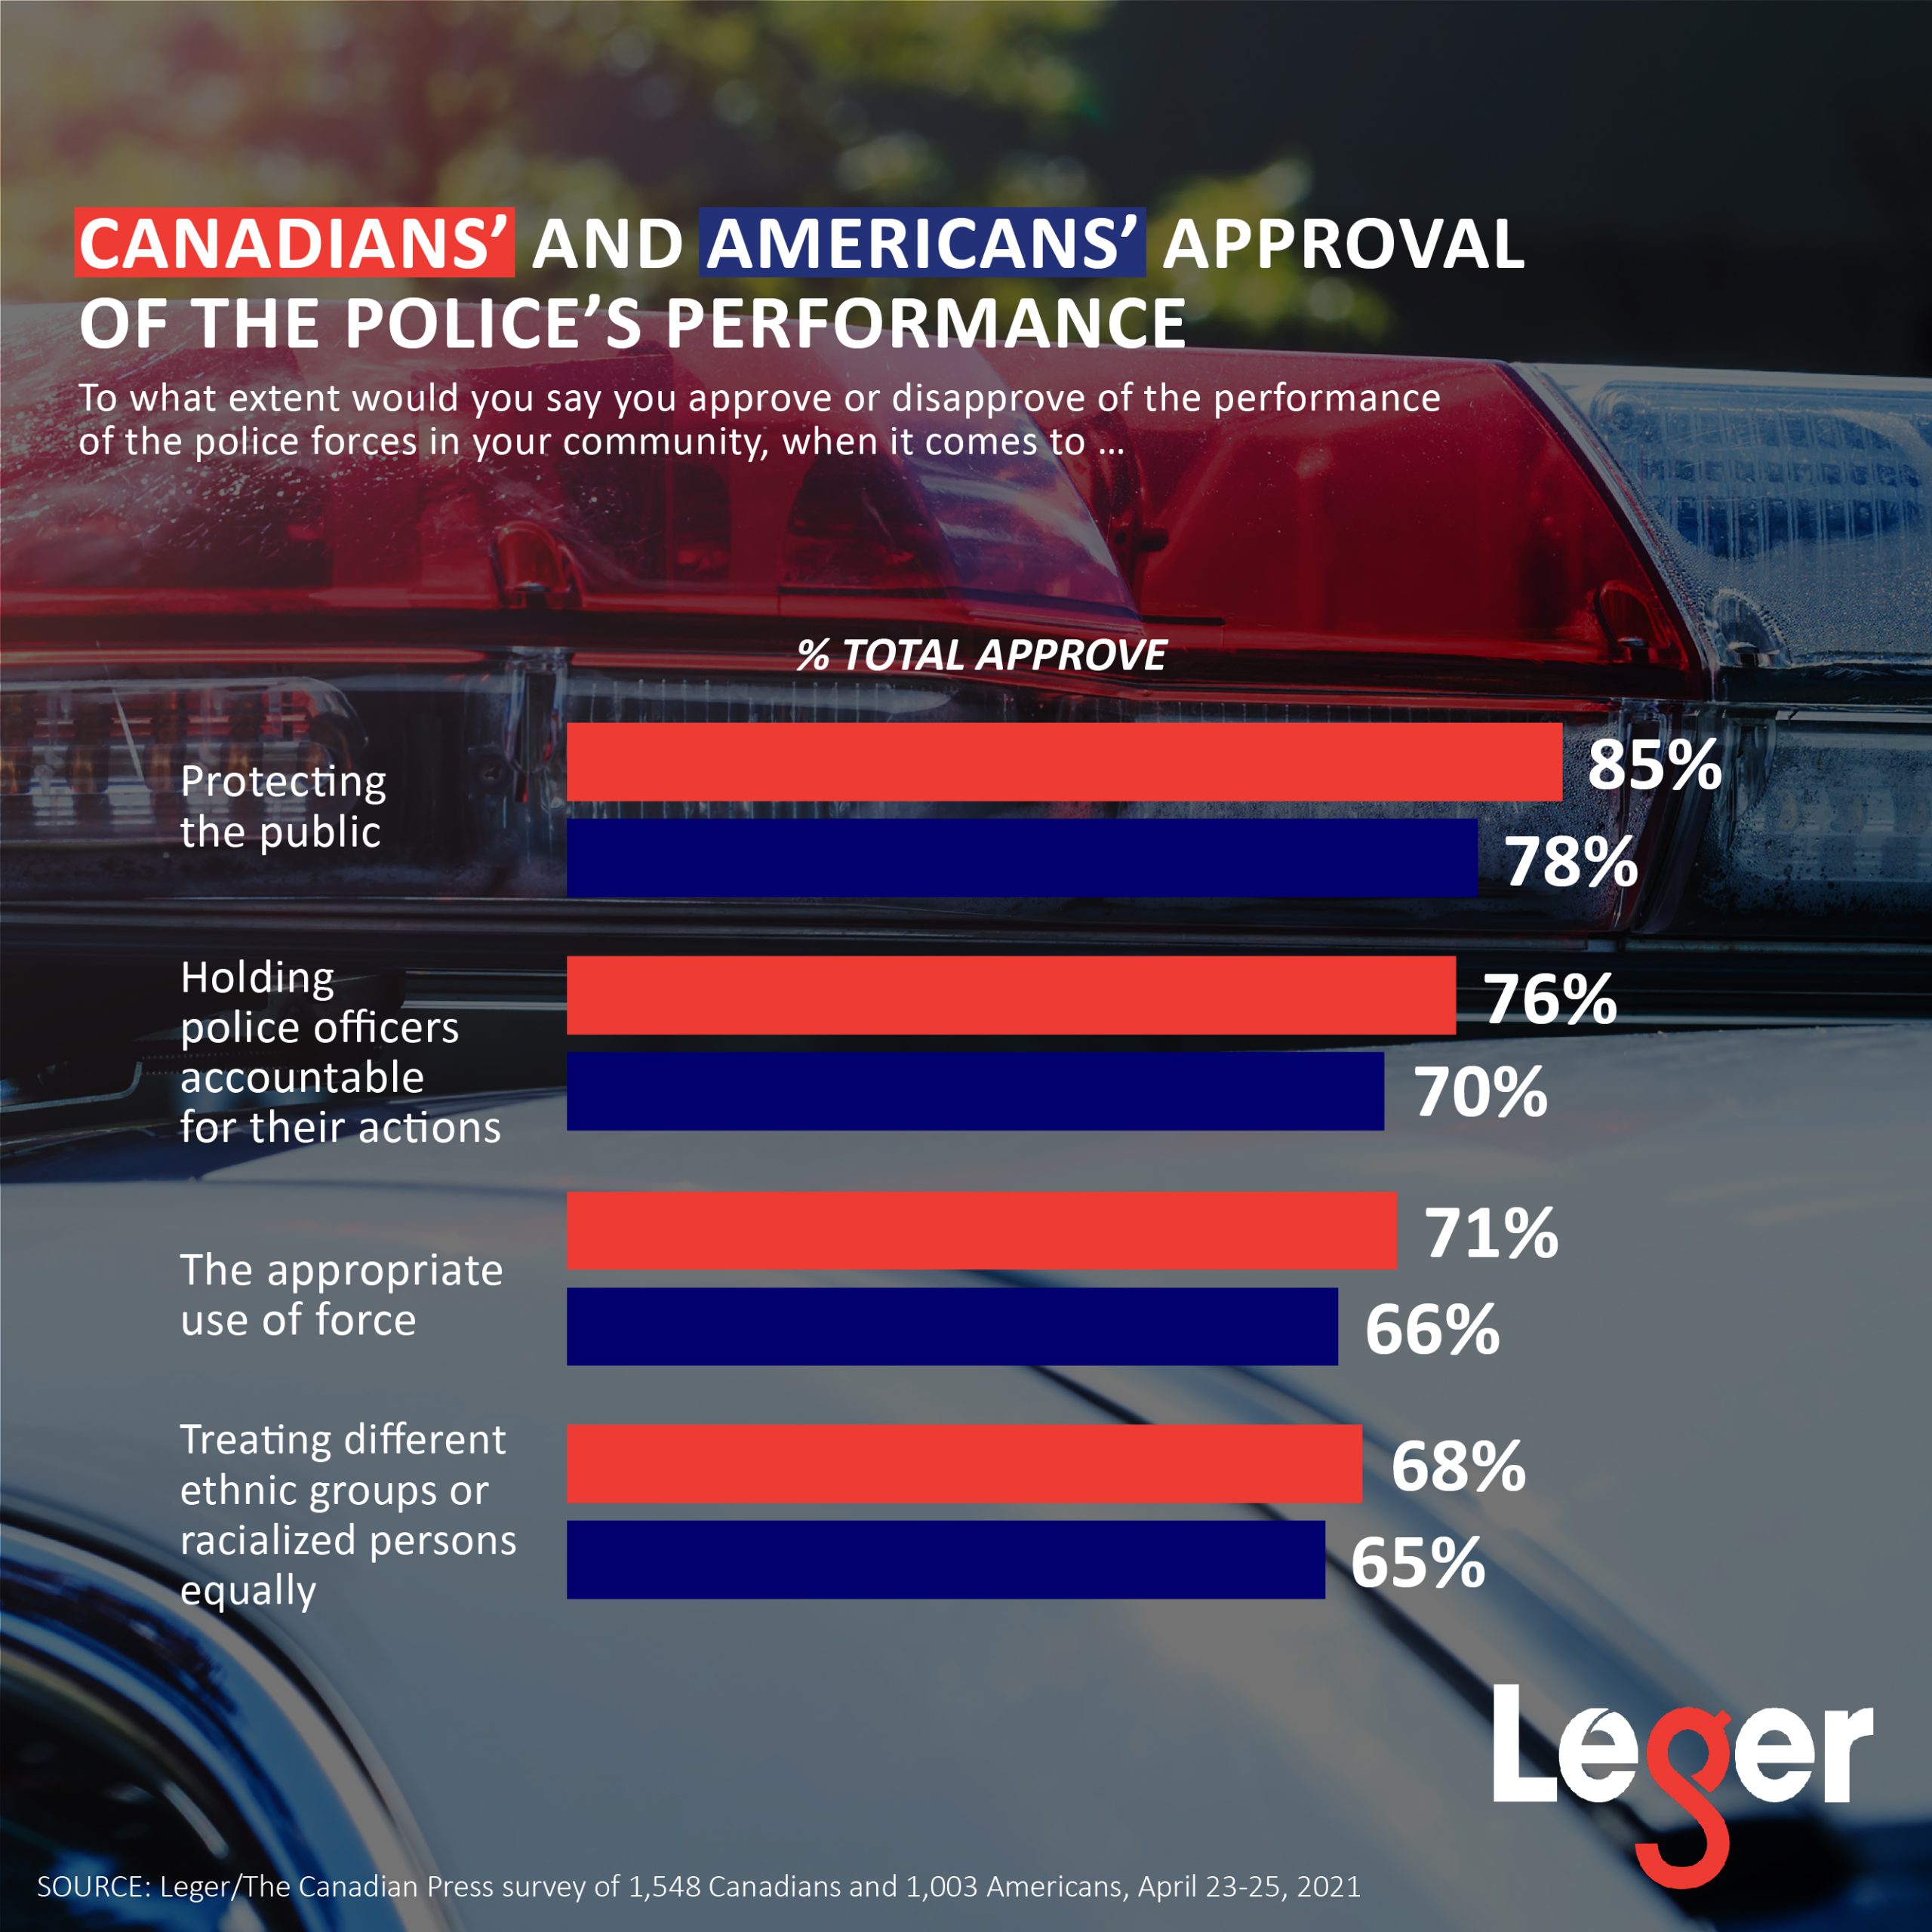 Canadians' and Americans' Approval of the Police's Performance